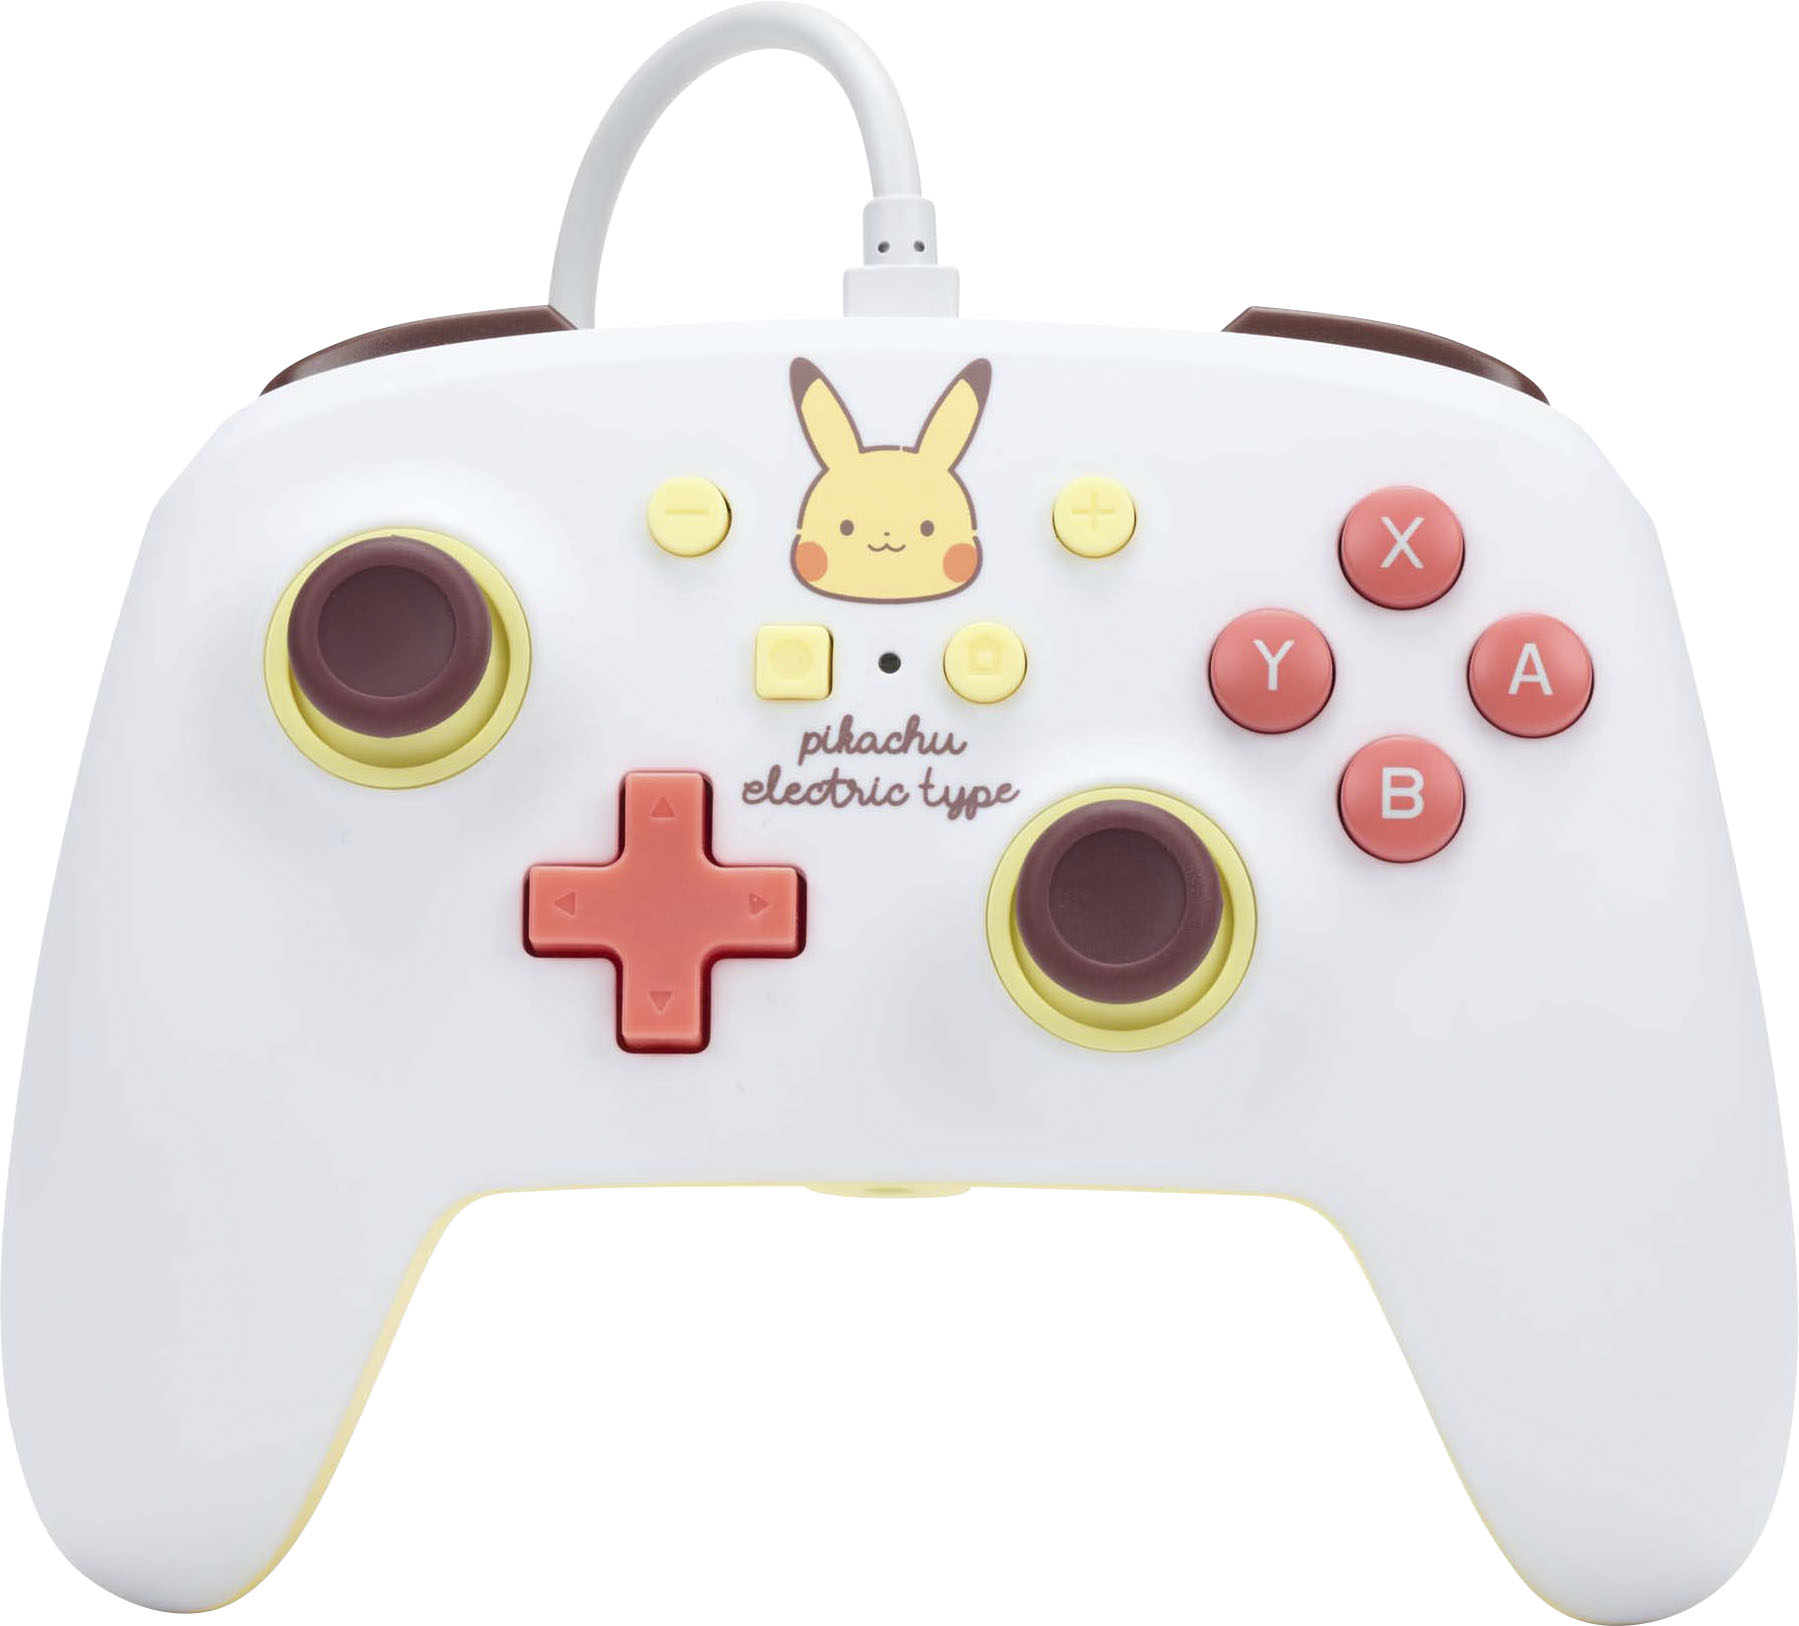 PowerA - Enhanced Wired Controller for Nintendo Switch - Pikachu Electric Type